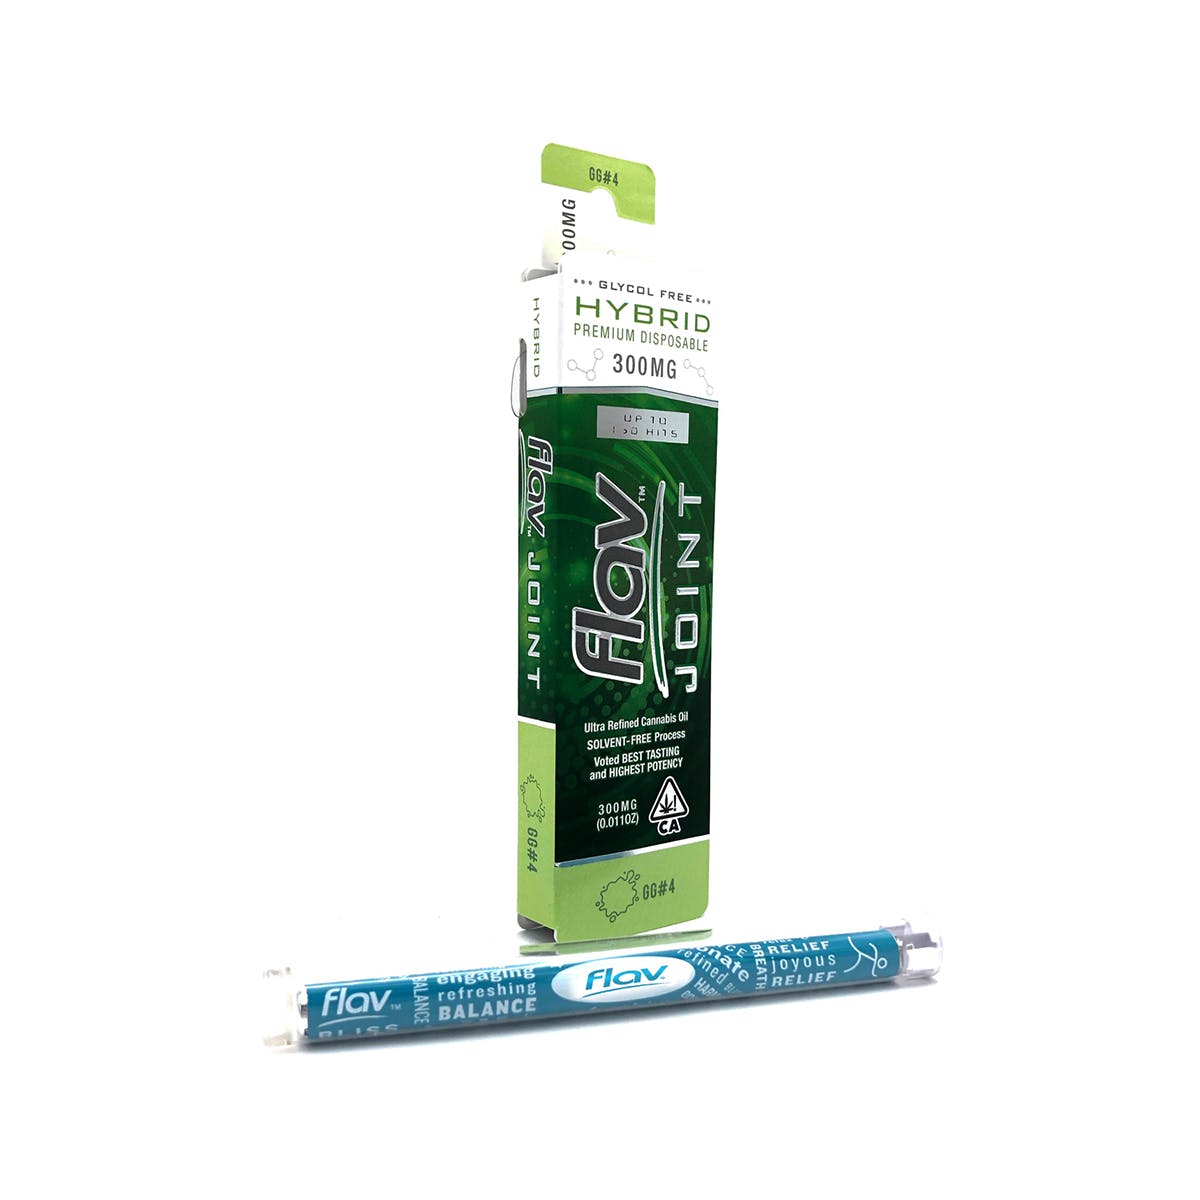 marijuana-dispensaries-desert-organic-solutions-palm-springs-92258-in-palm-springs-disposable-joints-gg4-300mg